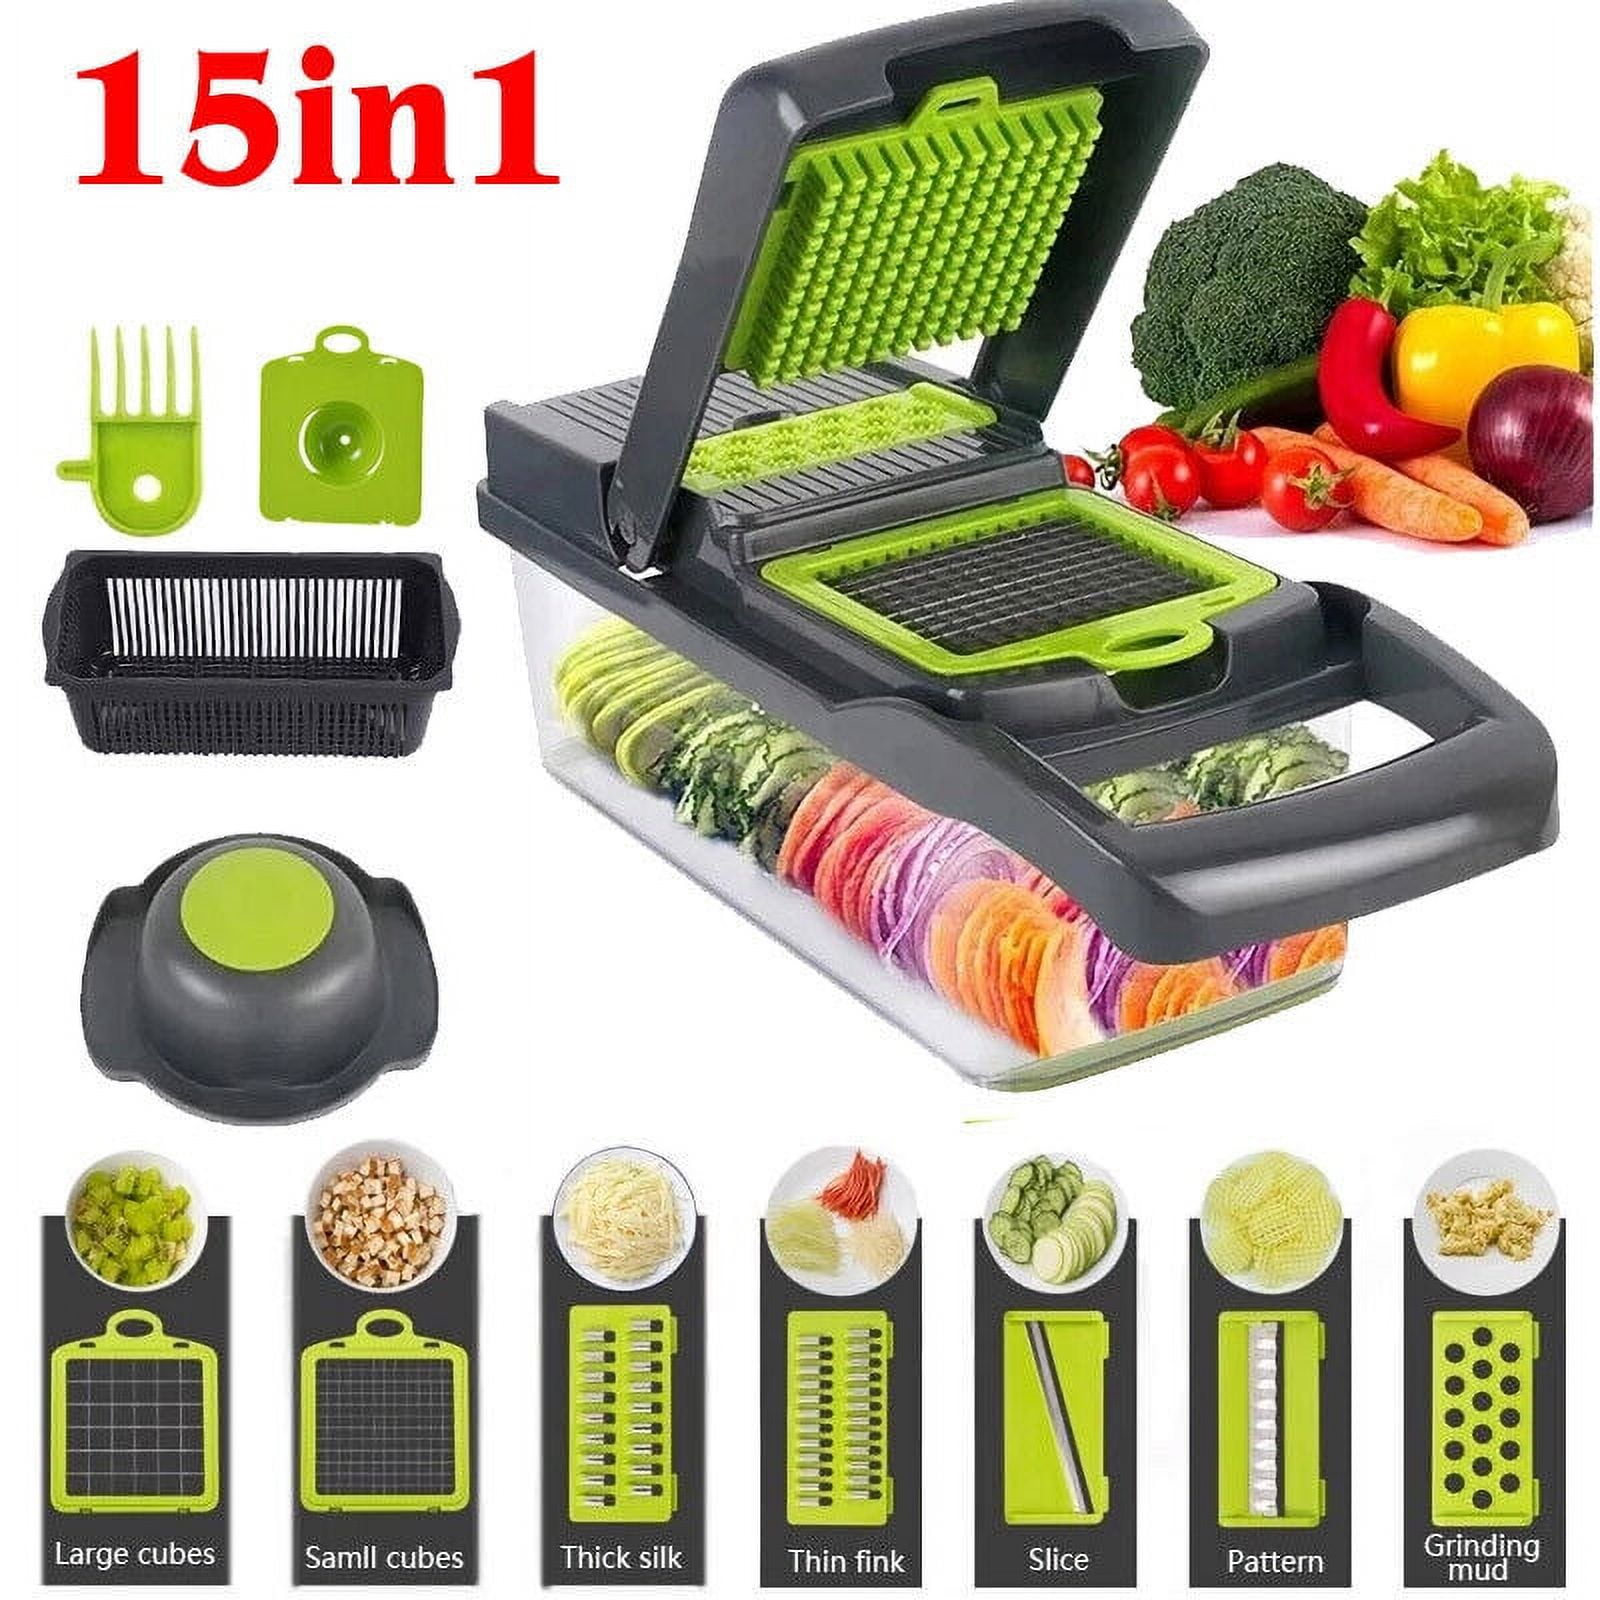  Vegetable Chopper Onion Chopper Dicer 15 in 1 Professional  Mandoline Slicer for Kitchen, Multifunctional Food Chopper Cutter for  Cucumber, Potato, Tomato, Veggie with 11 blades and Filter Basket: Home &  Kitchen